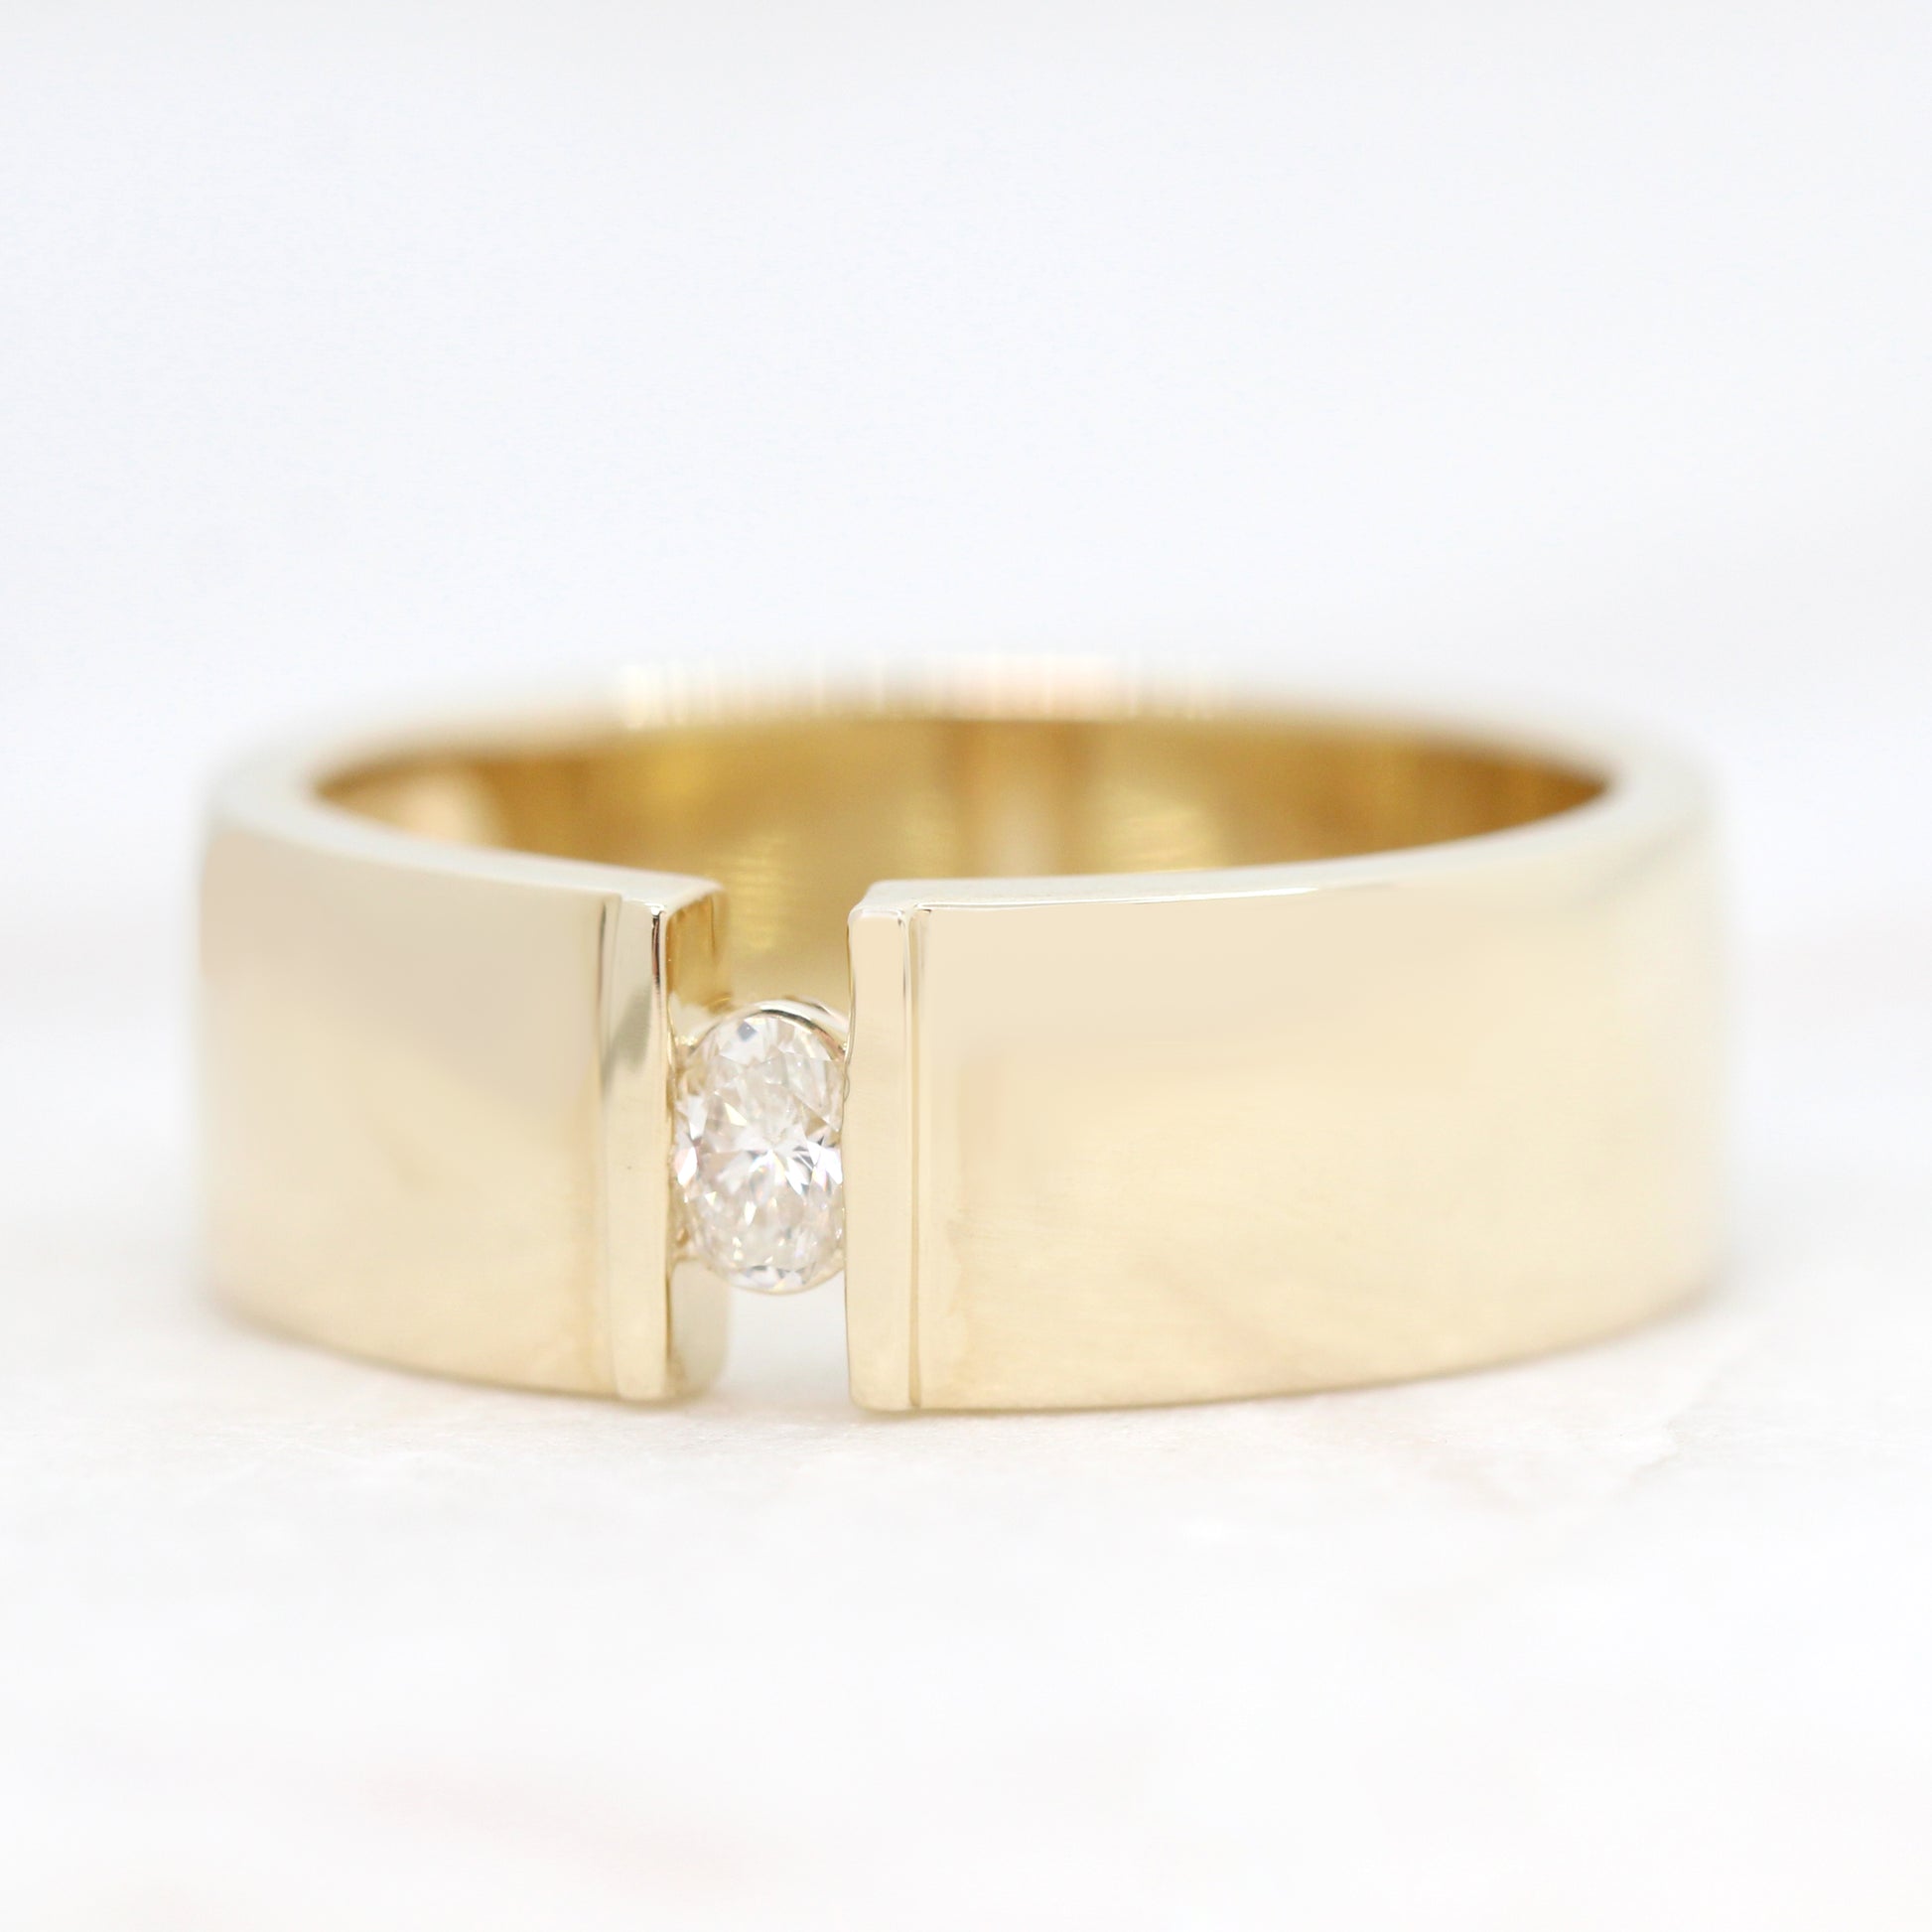 Sawyer - Unisex Diamond Wedding / Anniversary Band in Your Choice of 10k Gold - Midwinter Co. Alternative Bridal Rings and Modern Fine Jewelry